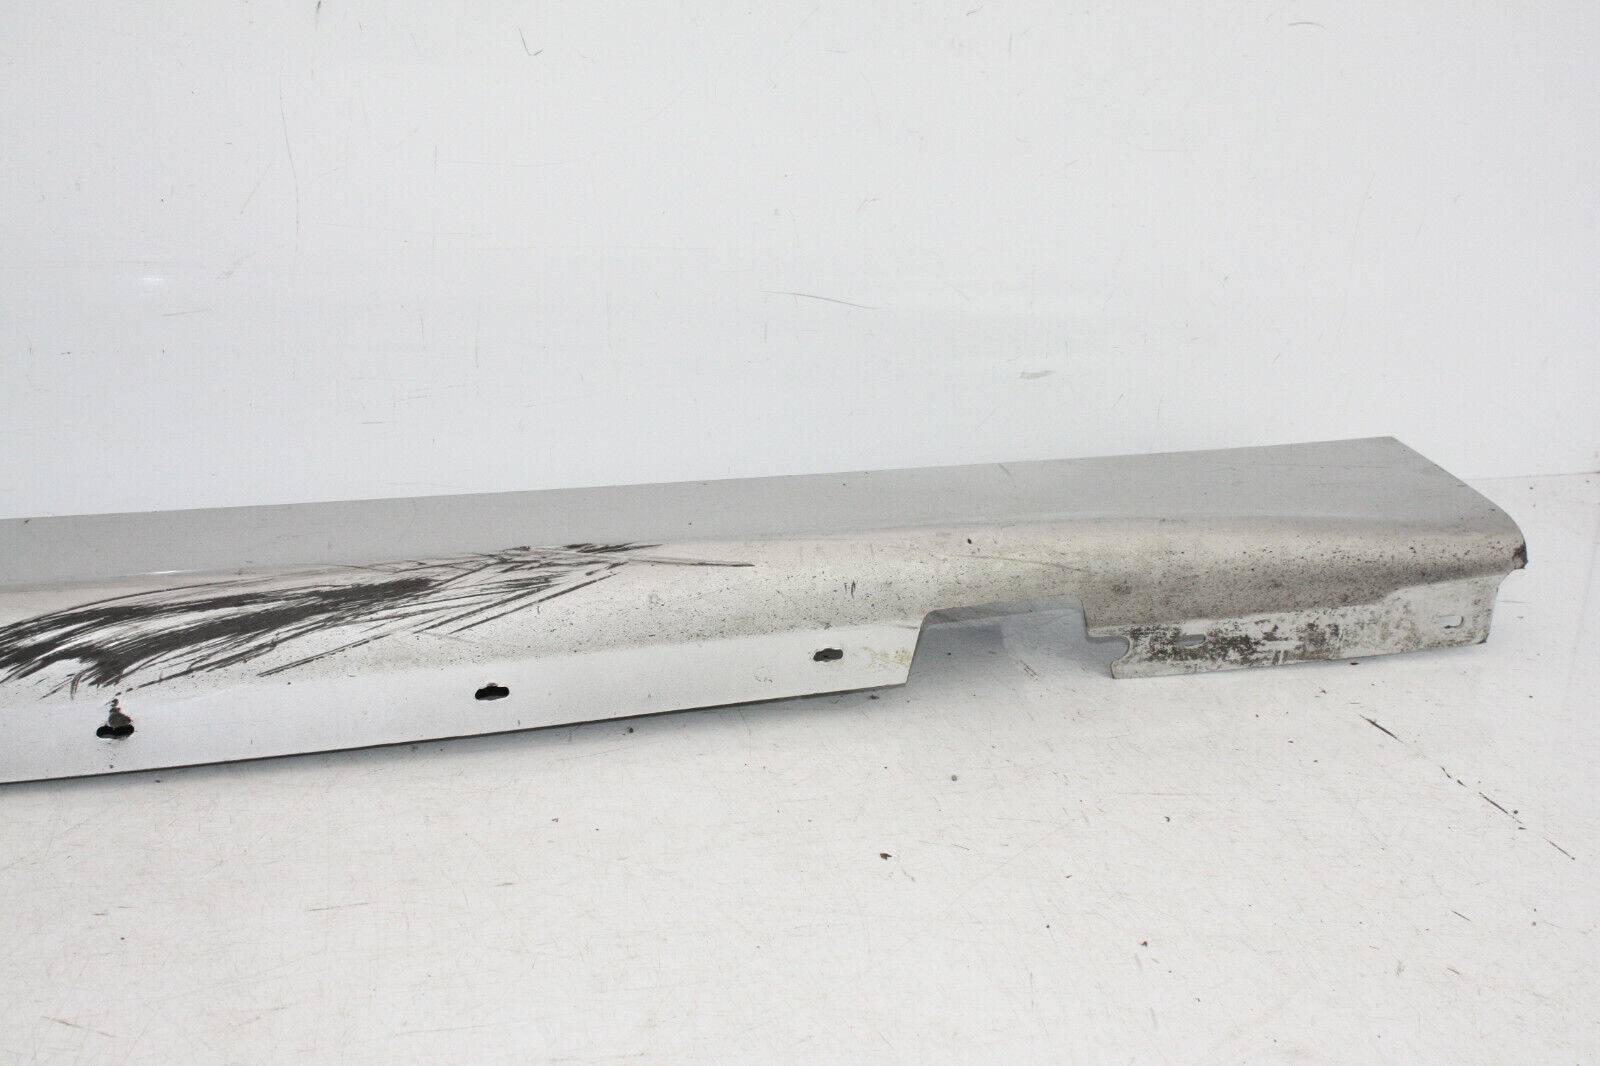 BMW-1-SERIES-E87-RIGHT-SIDE-SKIRT-2004-TO-2007-175367544522-10